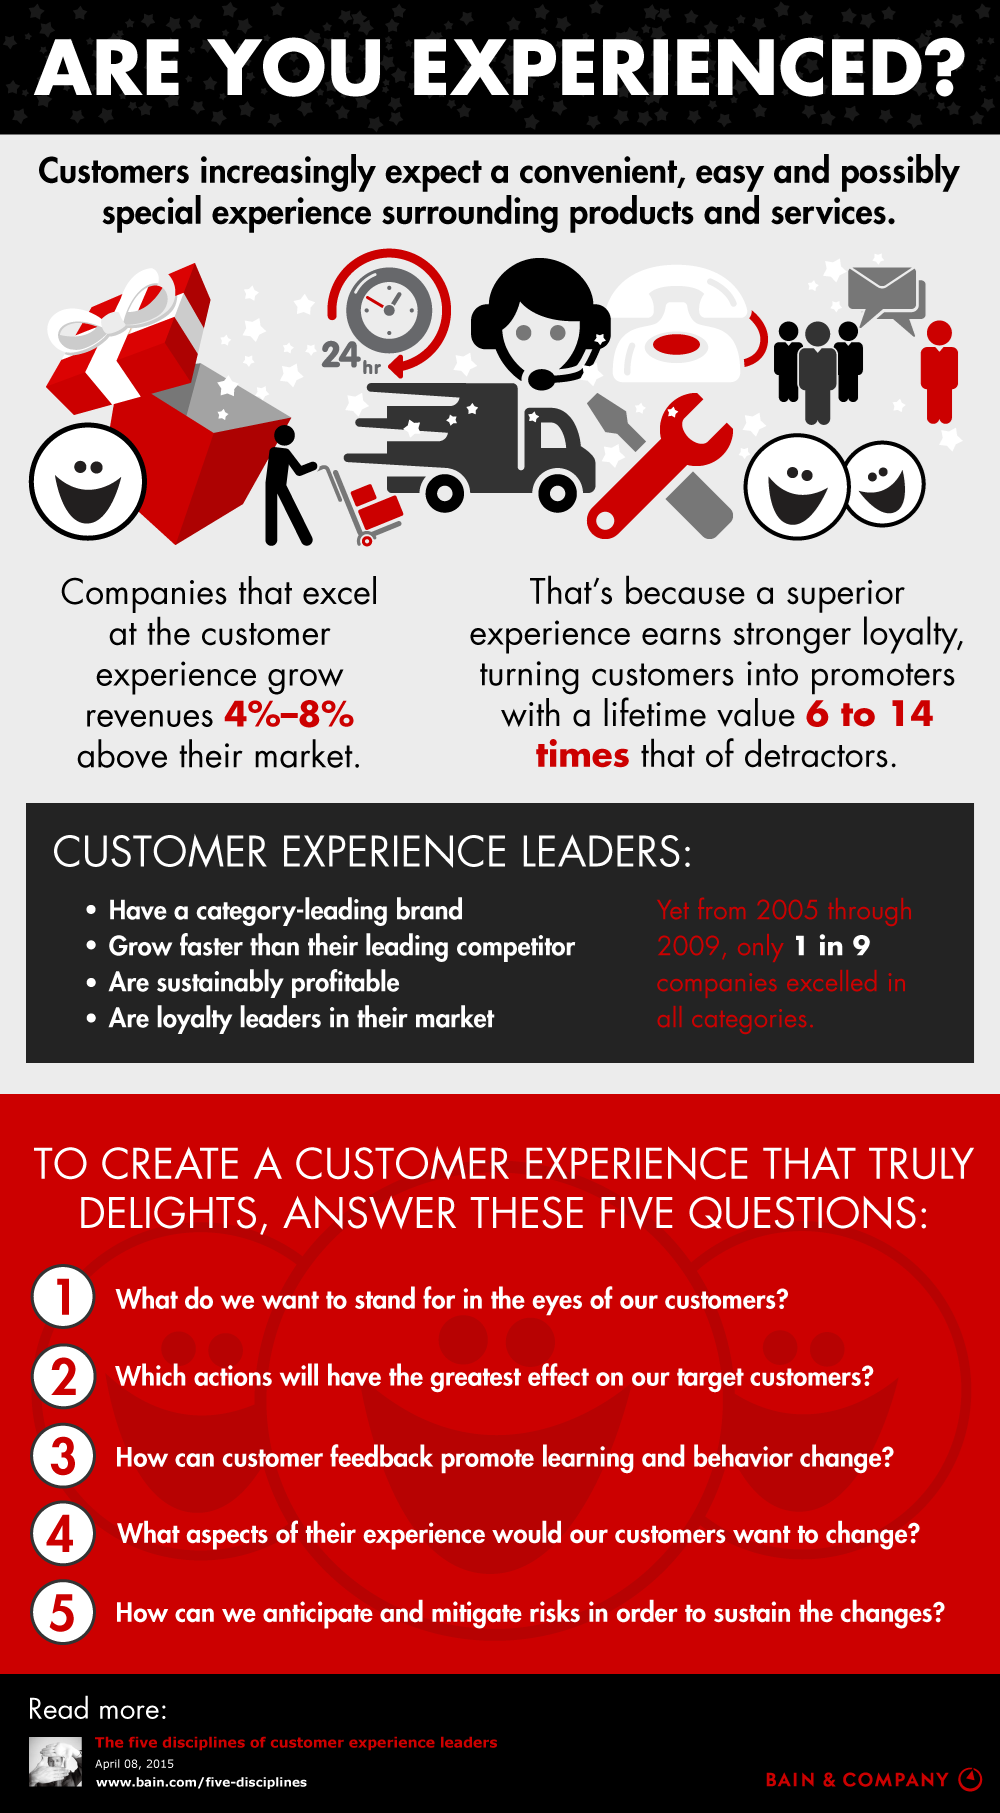 A winning customer experience grow faster and develop loyal followings